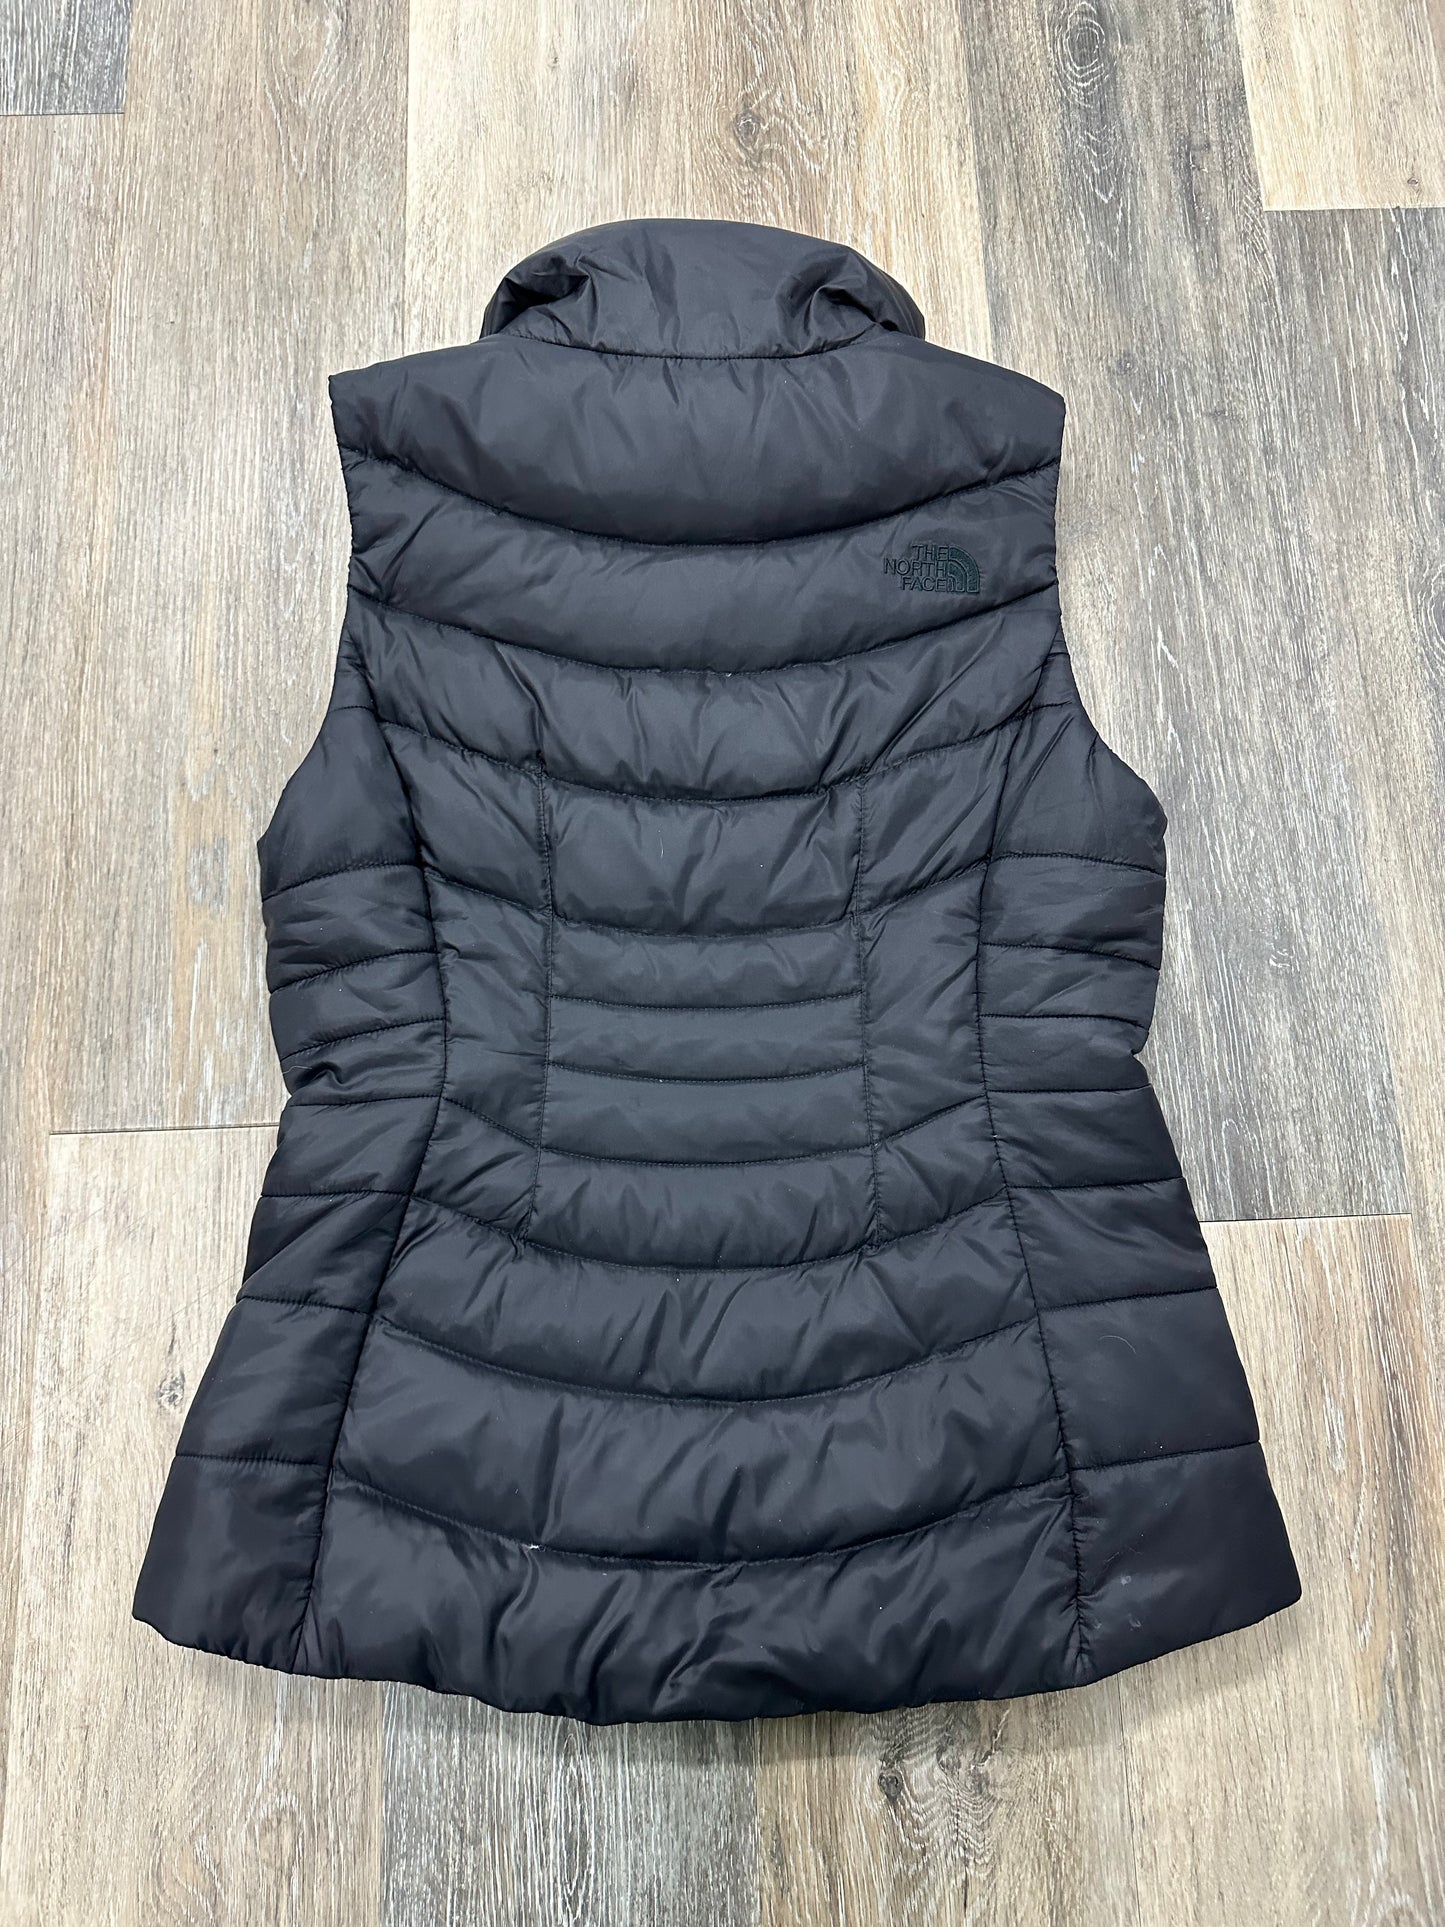 Vest Puffer & Quilted By North Face  Size: Xs